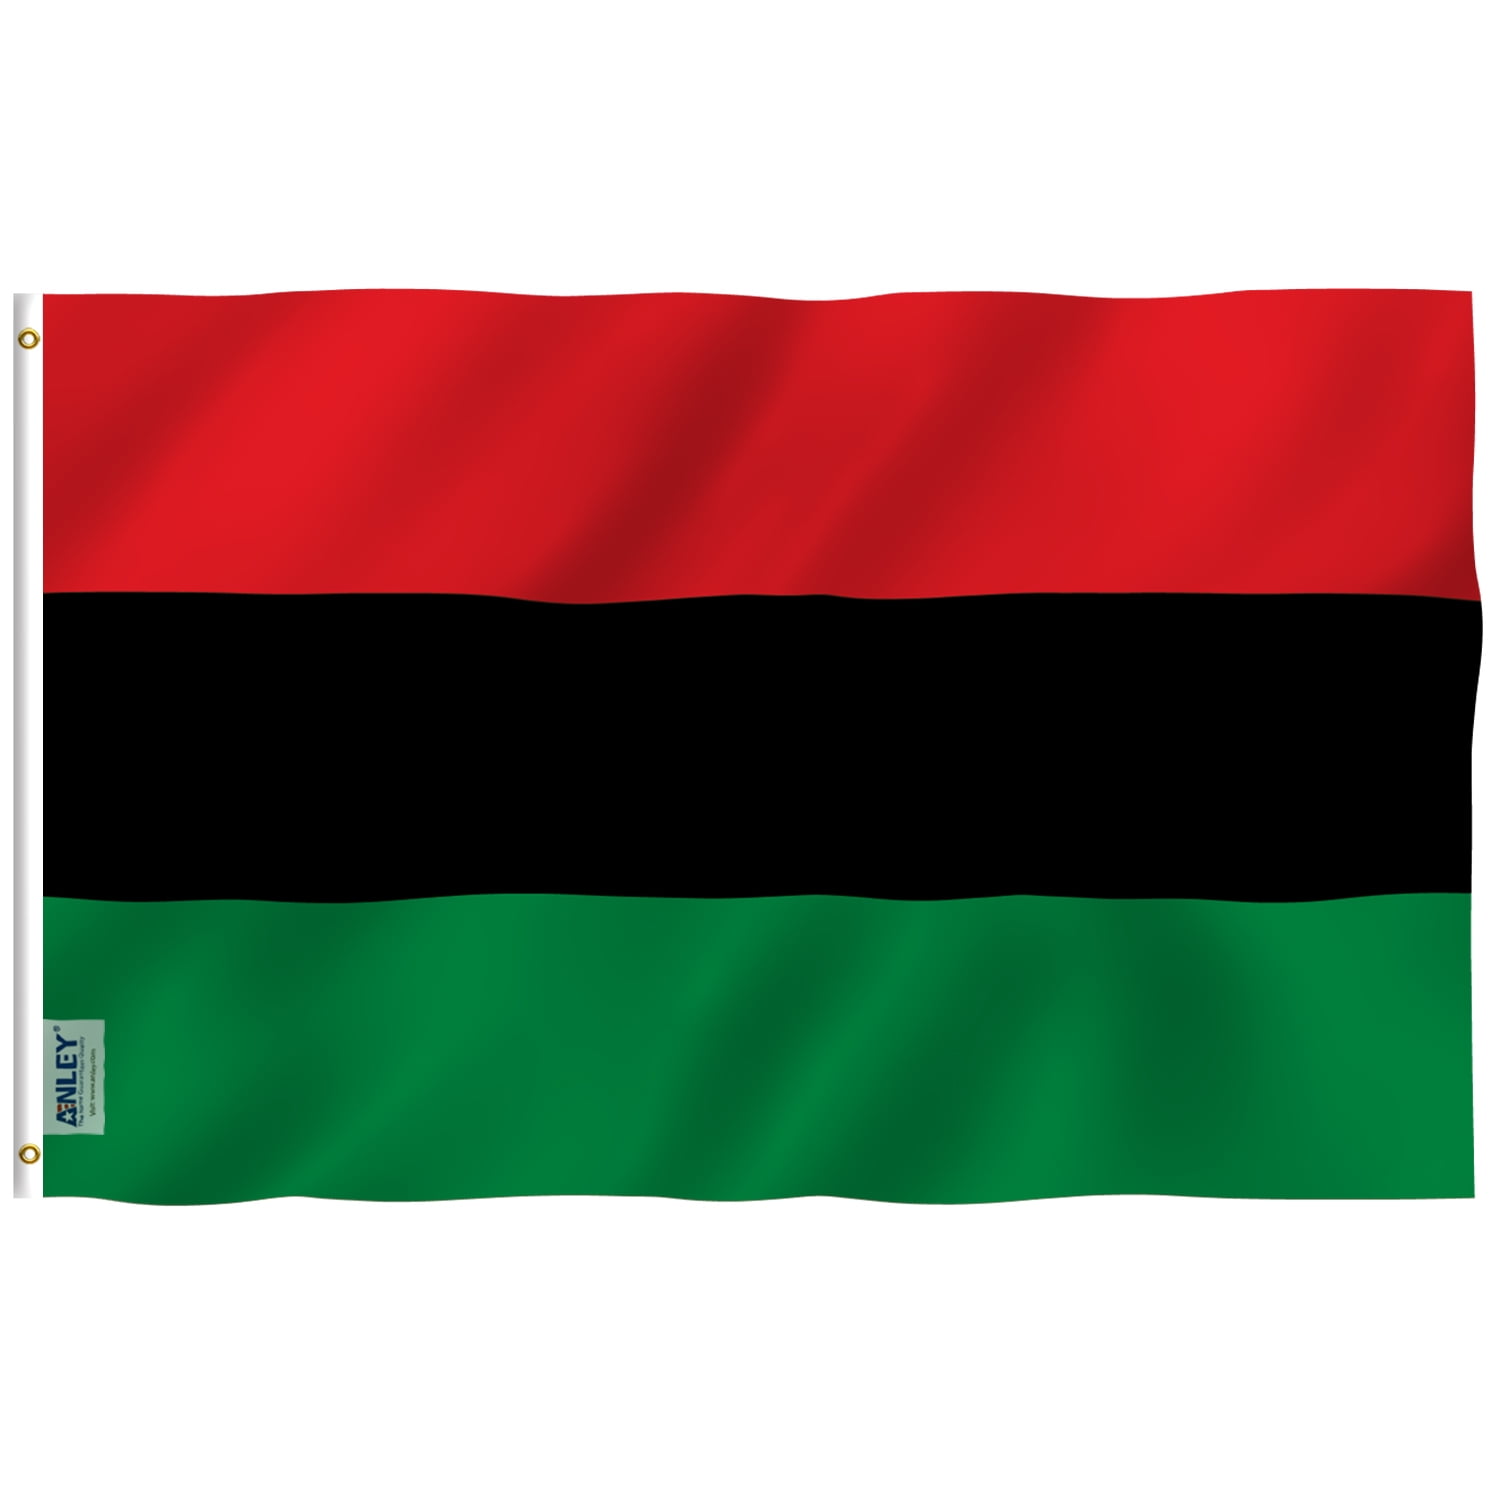 Afro American Flag 12" x 18" IAfrican American Black Lives Matter USA Red Green4